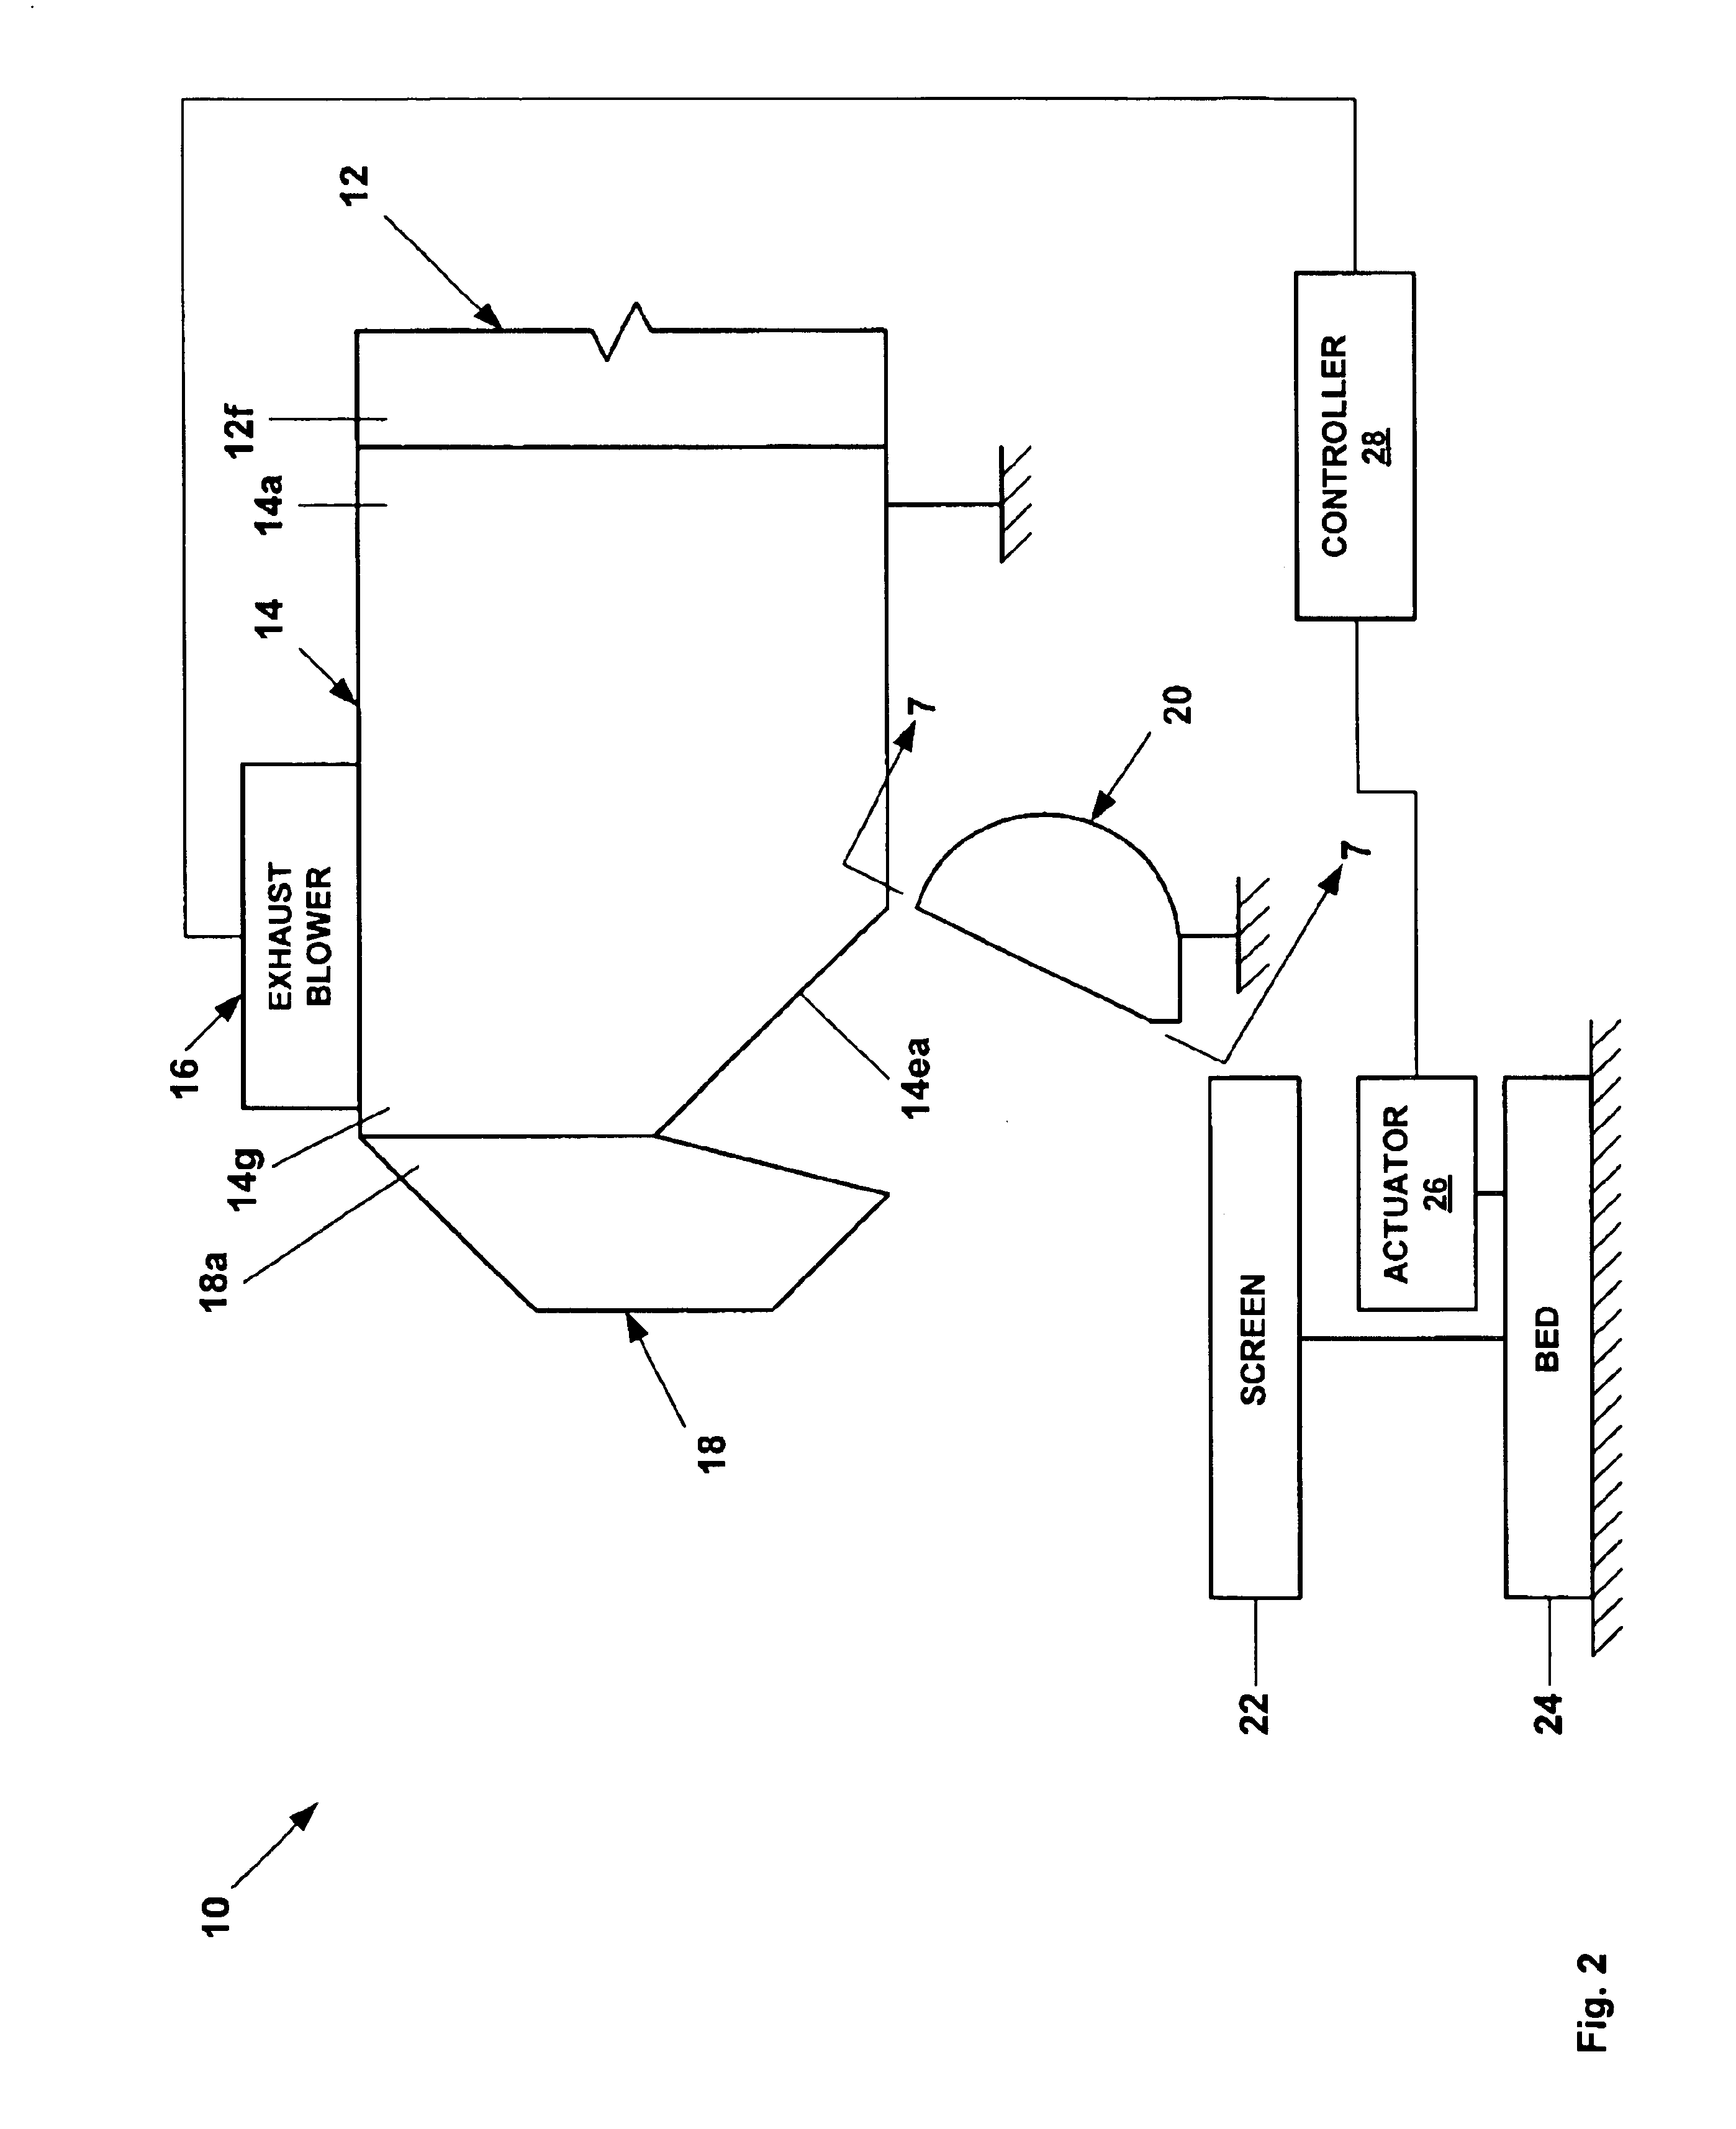 Flow diverter and exhaust blower for vibrating screen separator assembly